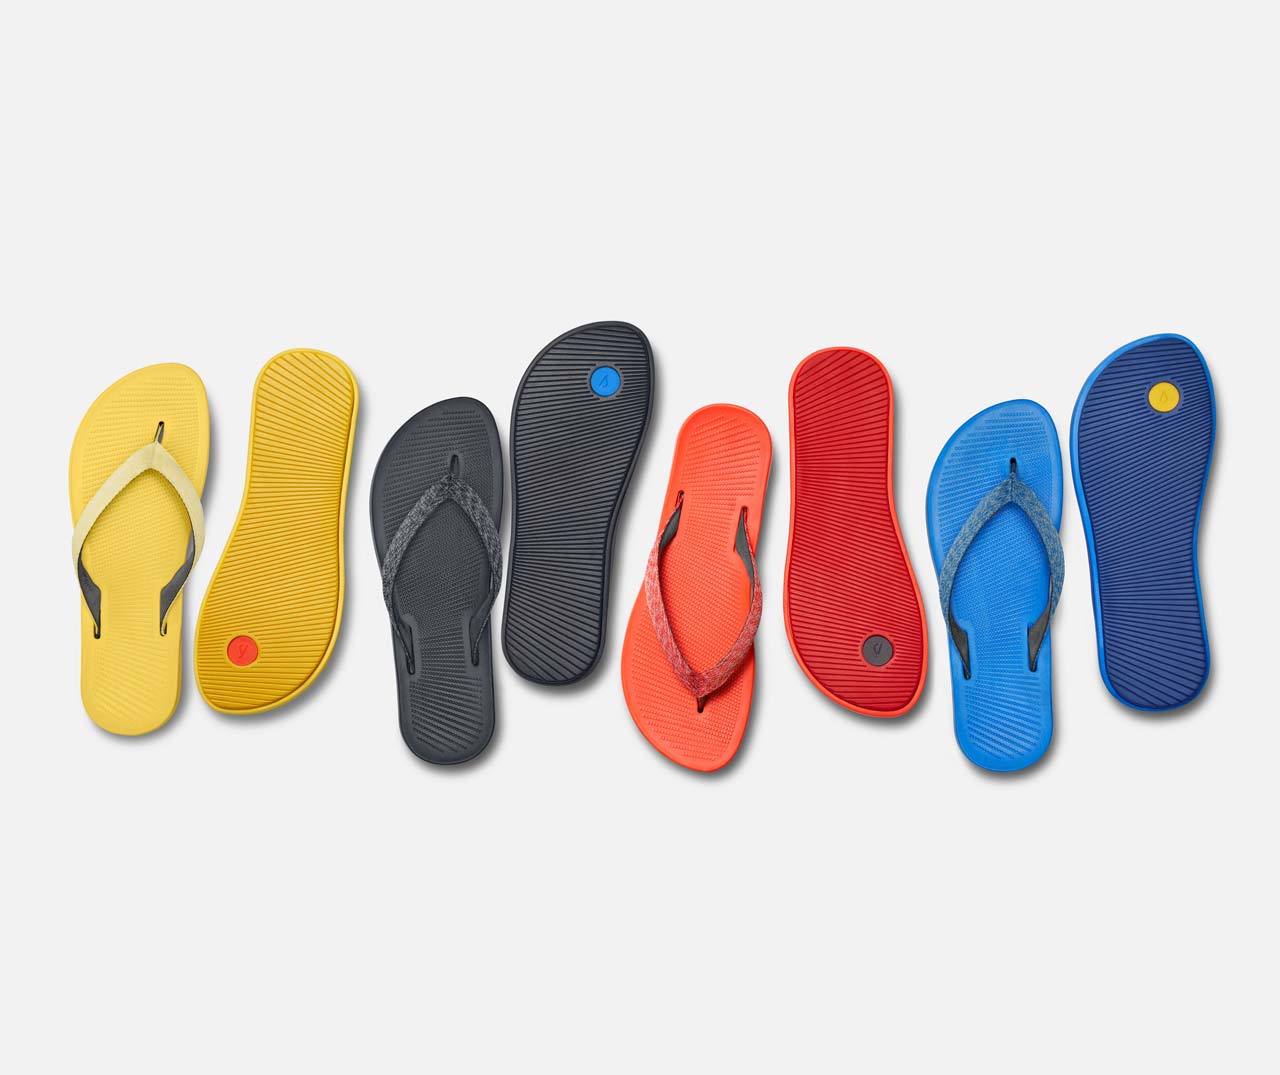 Allbirds Launches Colorful Flip Flops Made from Sugar